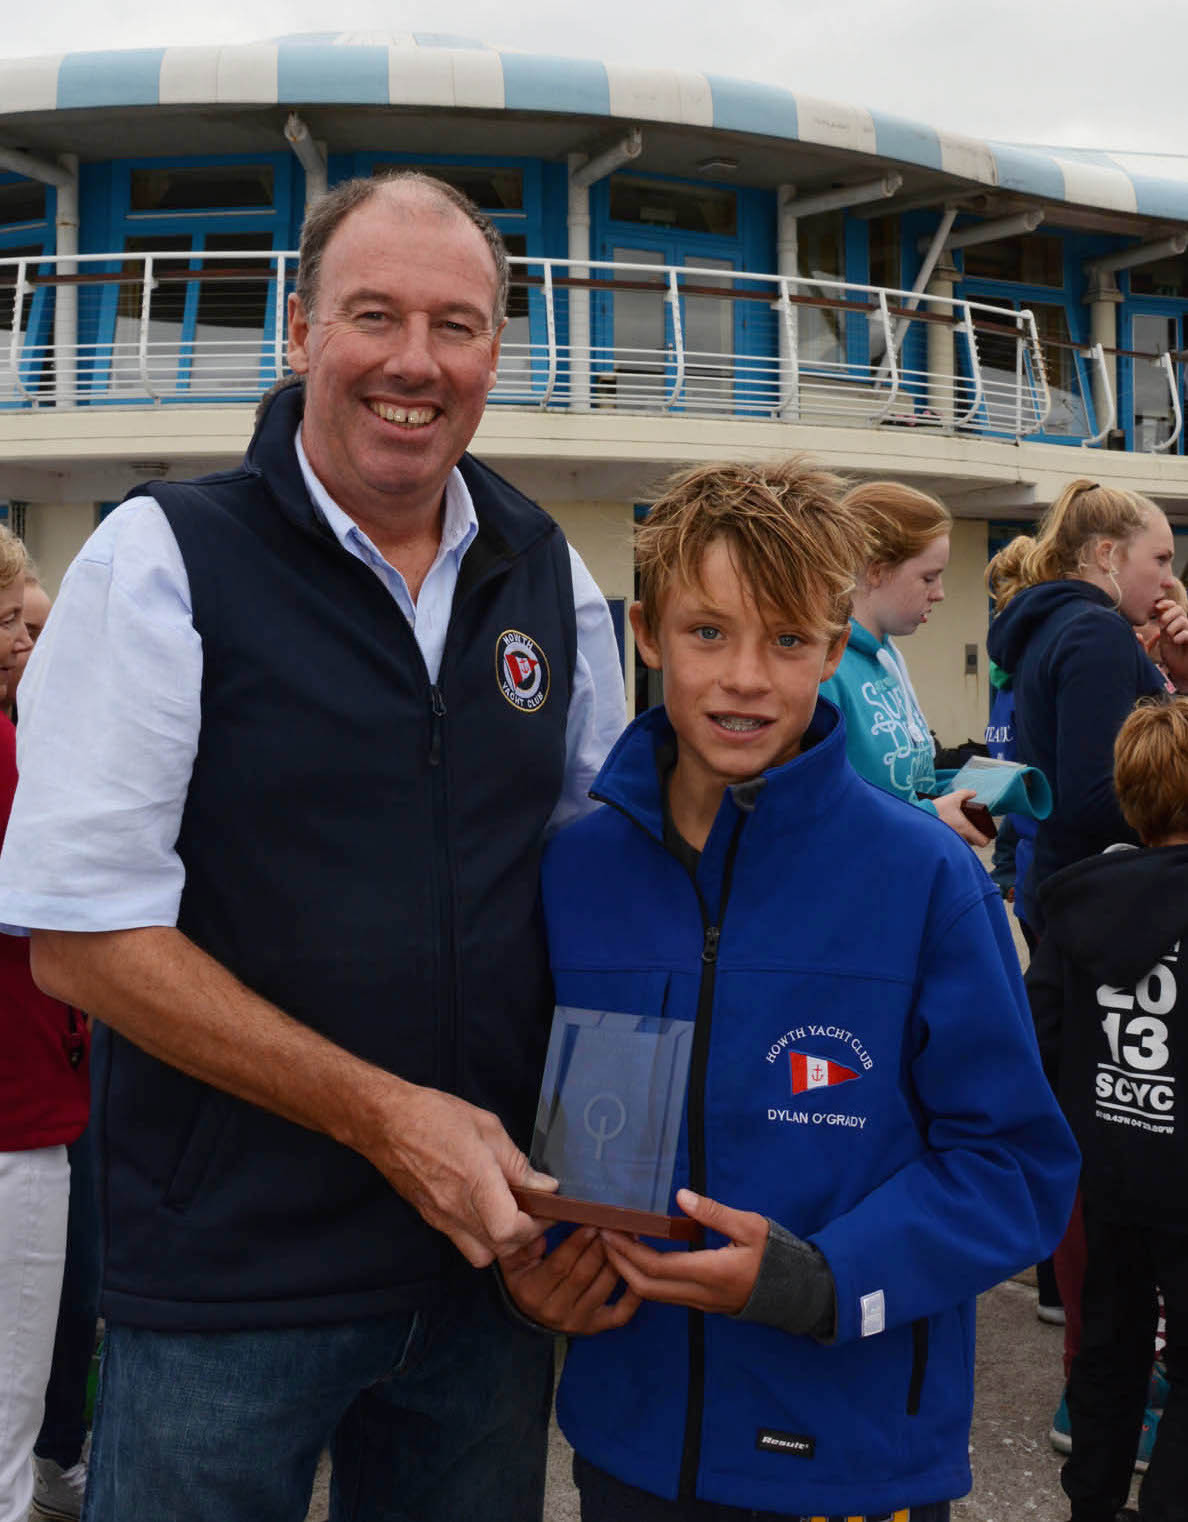 HYC's Dylan O'Grady narrowly missed out on the main prize, finishing a brilliant 2nd place in the Senior Gold Fleet